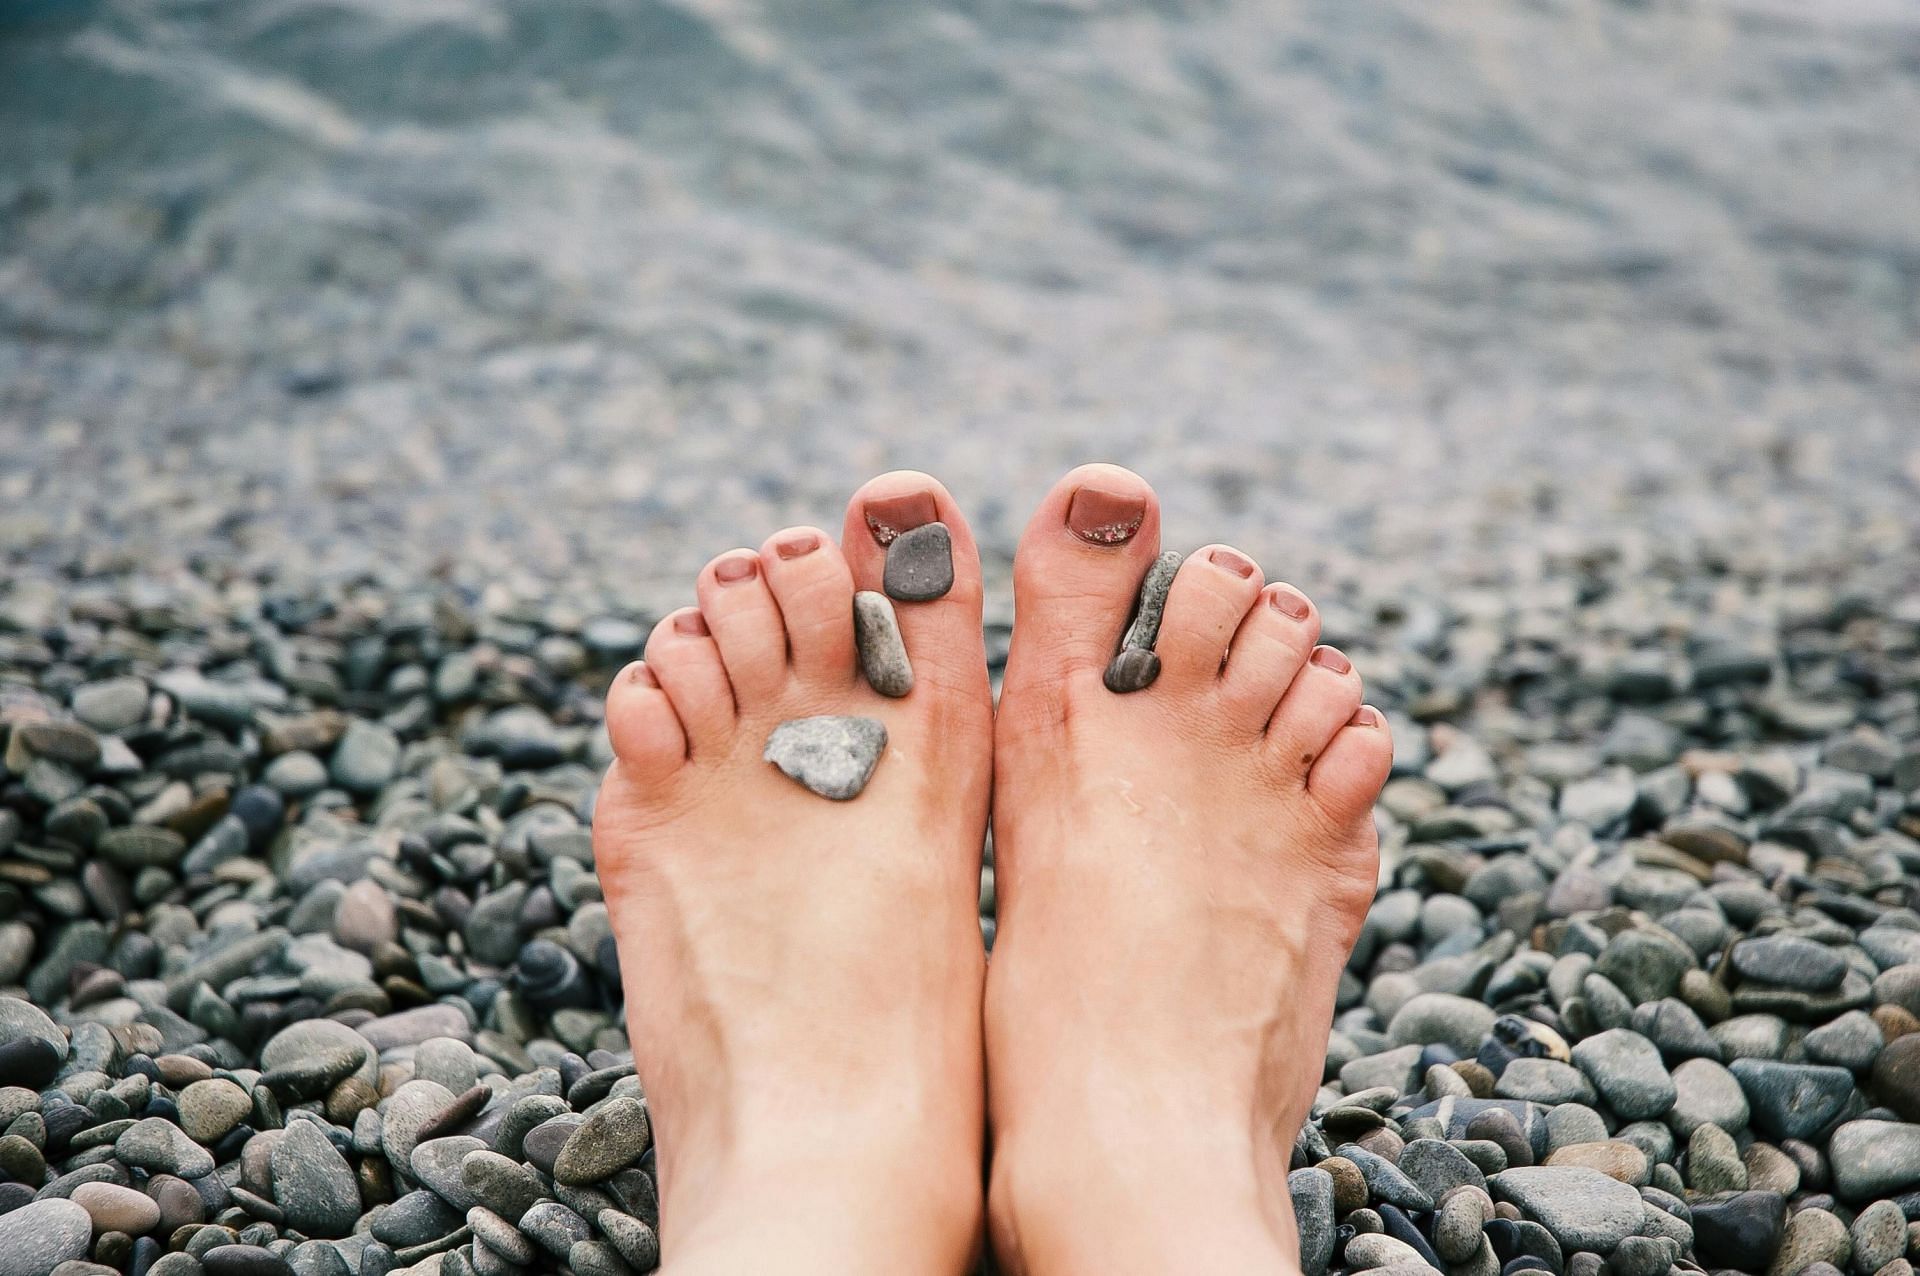 causes of swollen feet and ankles (image sourced via Pexels / Photo by evg)